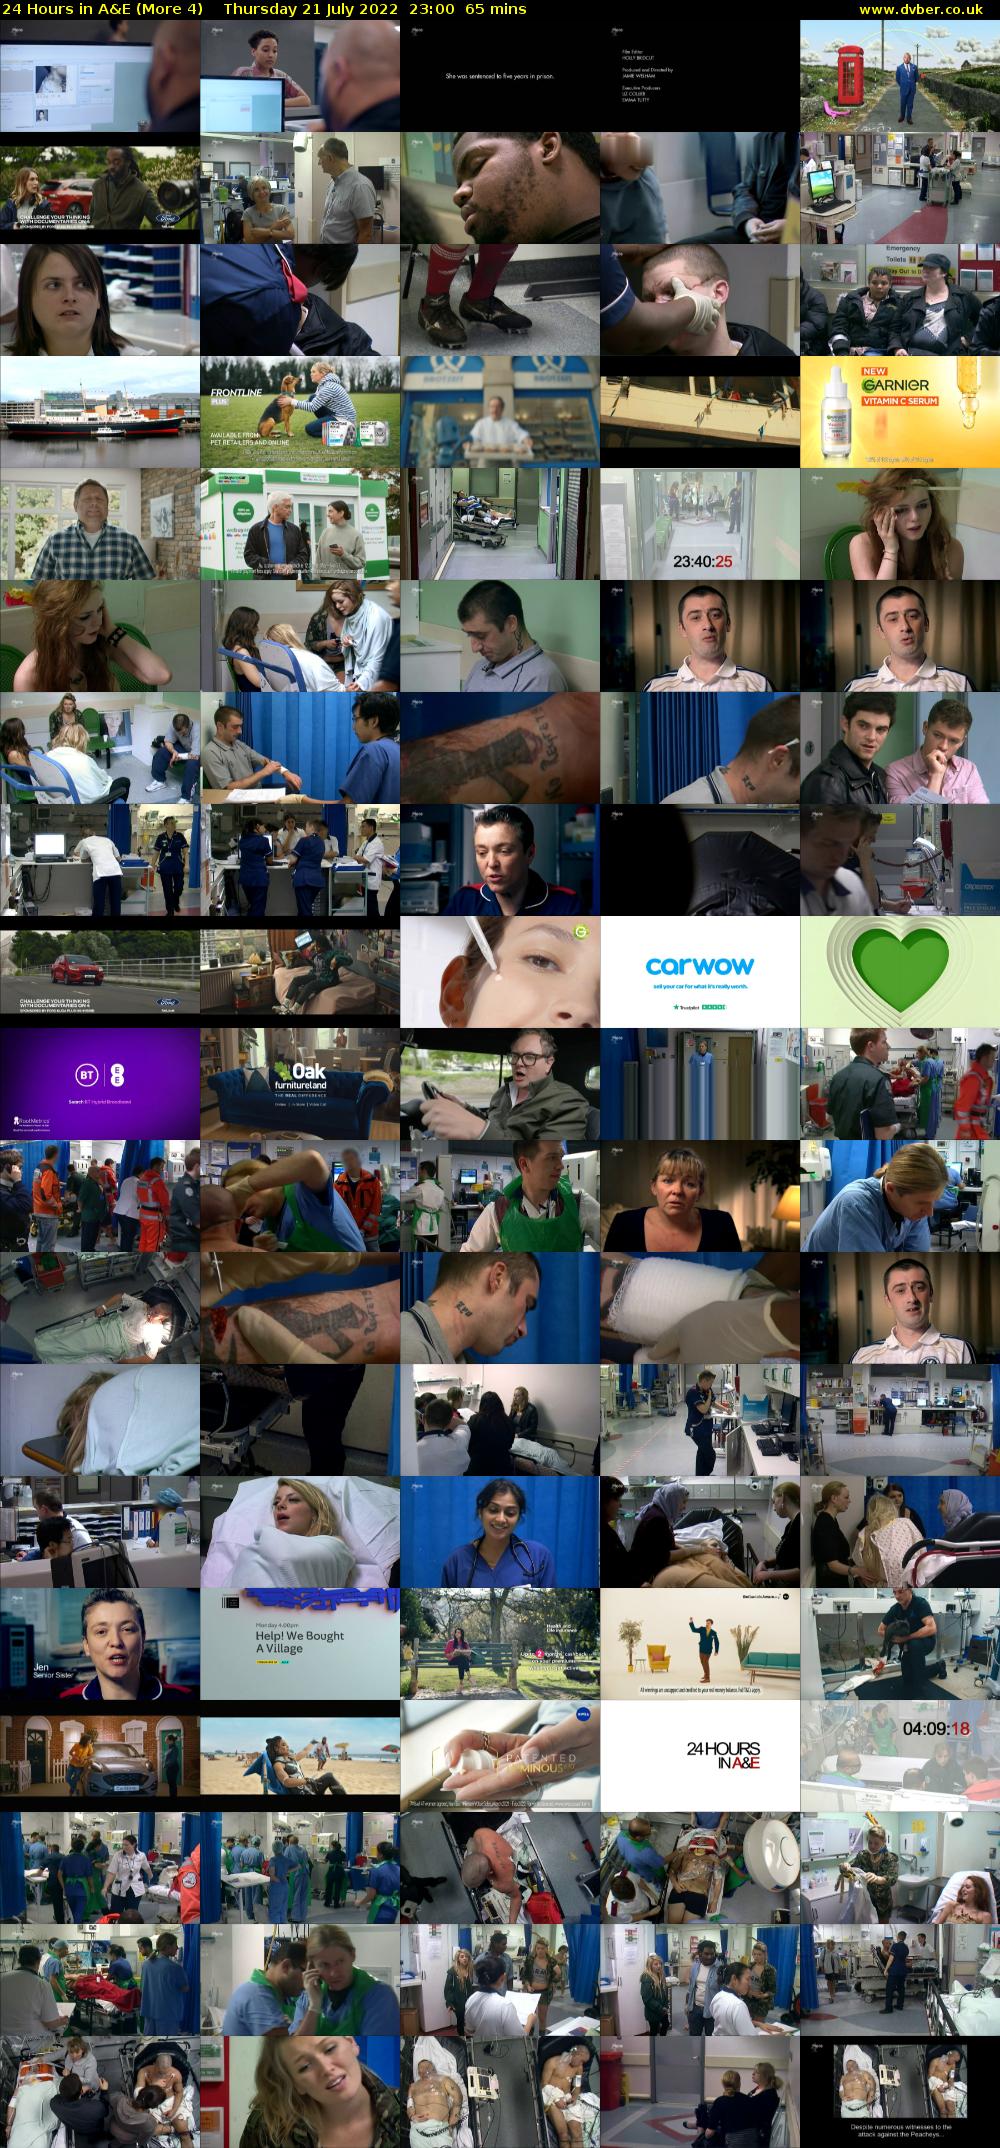 24 Hours in A&E (More 4) Thursday 21 July 2022 23:00 - 00:05